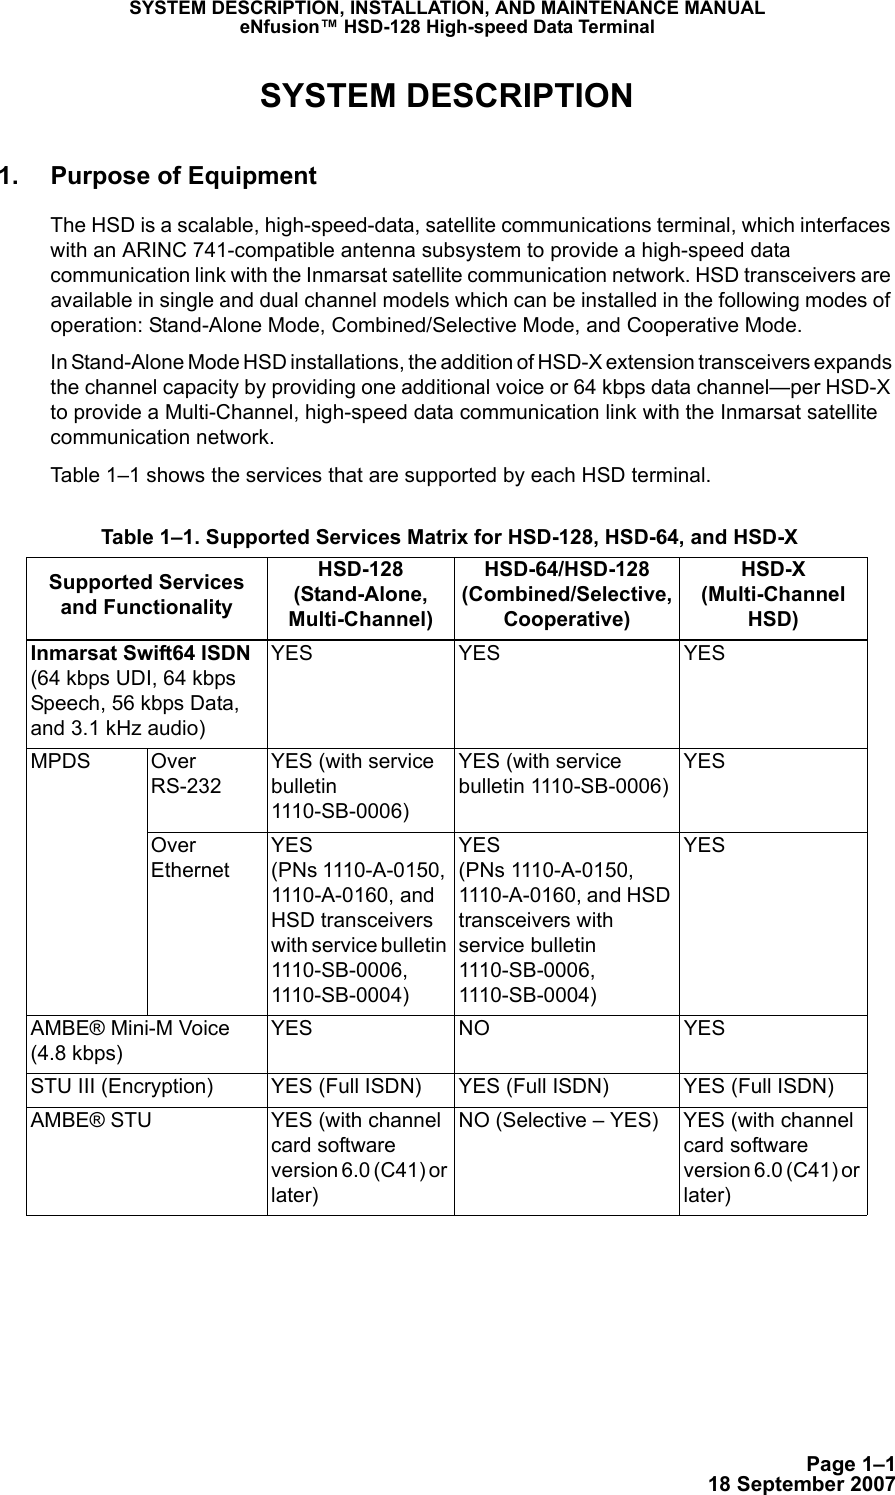 Page 1–118 September 2007SYSTEM DESCRIPTION, INSTALLATION, AND MAINTENANCE MANUALeNfusion™ HSD-128 High-speed Data TerminalSYSTEM DESCRIPTION1. Purpose of EquipmentThe HSD is a scalable, high-speed-data, satellite communications terminal, which interfaces with an ARINC 741-compatible antenna subsystem to provide a high-speed data communication link with the Inmarsat satellite communication network. HSD transceivers are available in single and dual channel models which can be installed in the following modes of operation: Stand-Alone Mode, Combined/Selective Mode, and Cooperative Mode.In Stand-Alone Mode HSD installations, the addition of HSD-X extension transceivers expands the channel capacity by providing one additional voice or 64 kbps data channel—per HSD-X to provide a Multi-Channel, high-speed data communication link with the Inmarsat satellite communication network.Table 1–1 shows the services that are supported by each HSD terminal. Table 1–1. Supported Services Matrix for HSD-128, HSD-64, and HSD-XSupported Services and FunctionalityHSD-128 (Stand-Alone, Multi-Channel)HSD-64/HSD-128 (Combined/Selective, Cooperative)HSD-X (Multi-Channel HSD)Inmarsat Swift64 ISDN  (64 kbps UDI, 64 kbps Speech, 56 kbps Data, and 3.1 kHz audio)YES YES YES MPDS Over RS-232YES (with service bulletin 1110-SB-0006) YES (with service bulletin 1110-SB-0006)YESOver EthernetYES  (PNs 1110-A-0150, 1110-A-0160, and HSD transceivers with service bulletin 1110-SB-0006, 1110-SB-0004)YES (PNs 1110-A-0150, 1110-A-0160, and HSD transceivers with service bulletin 1110-SB-0006, 1110-SB-0004) YESAMBE® Mini-M Voice (4.8 kbps)YES NO YESSTU III (Encryption) YES (Full ISDN) YES (Full ISDN) YES (Full ISDN)AMBE® STU YES (with channel card software version 6.0 (C41) or later)NO (Selective – YES) YES (with channel card software version 6.0 (C41) or later)